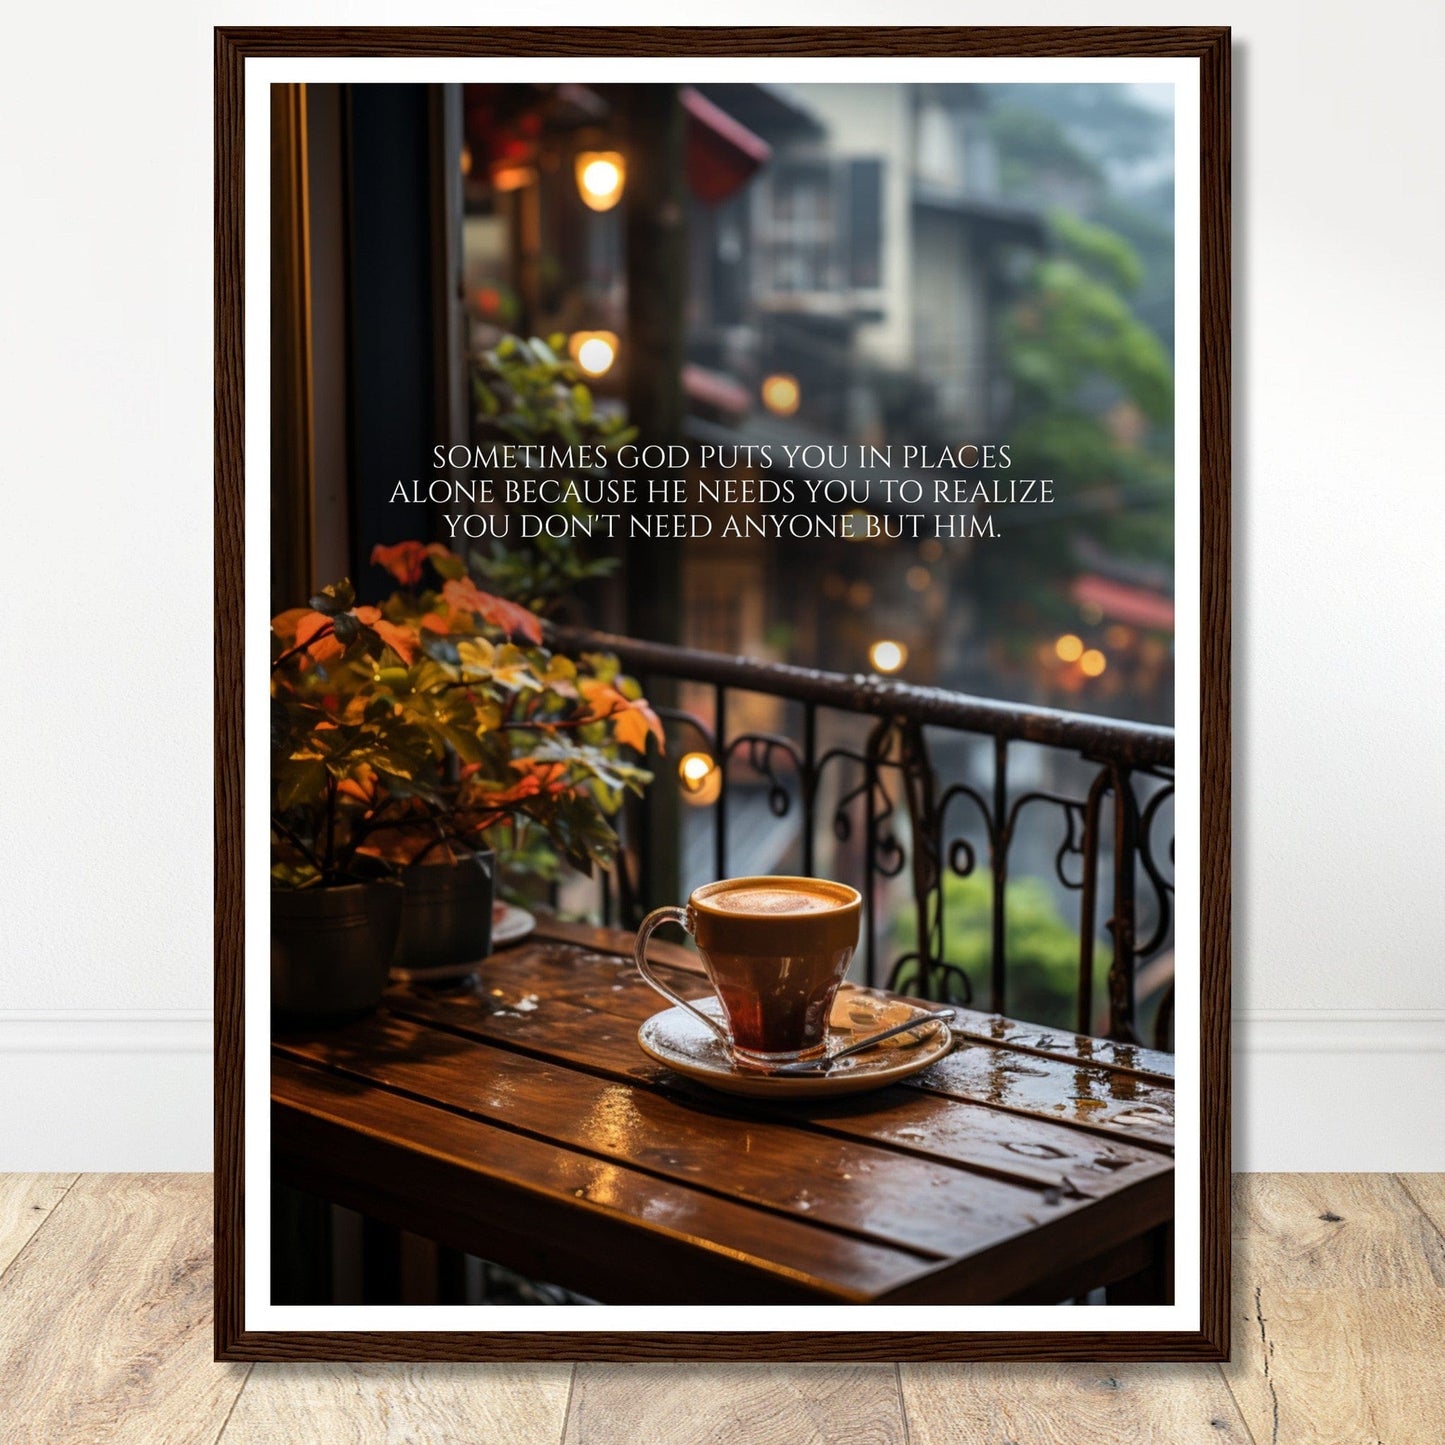 Coffee With My Father Print Material 45x60 cm / 18x24″ / Dark wood frame Premium Matte Paper Wooden Framed Poster